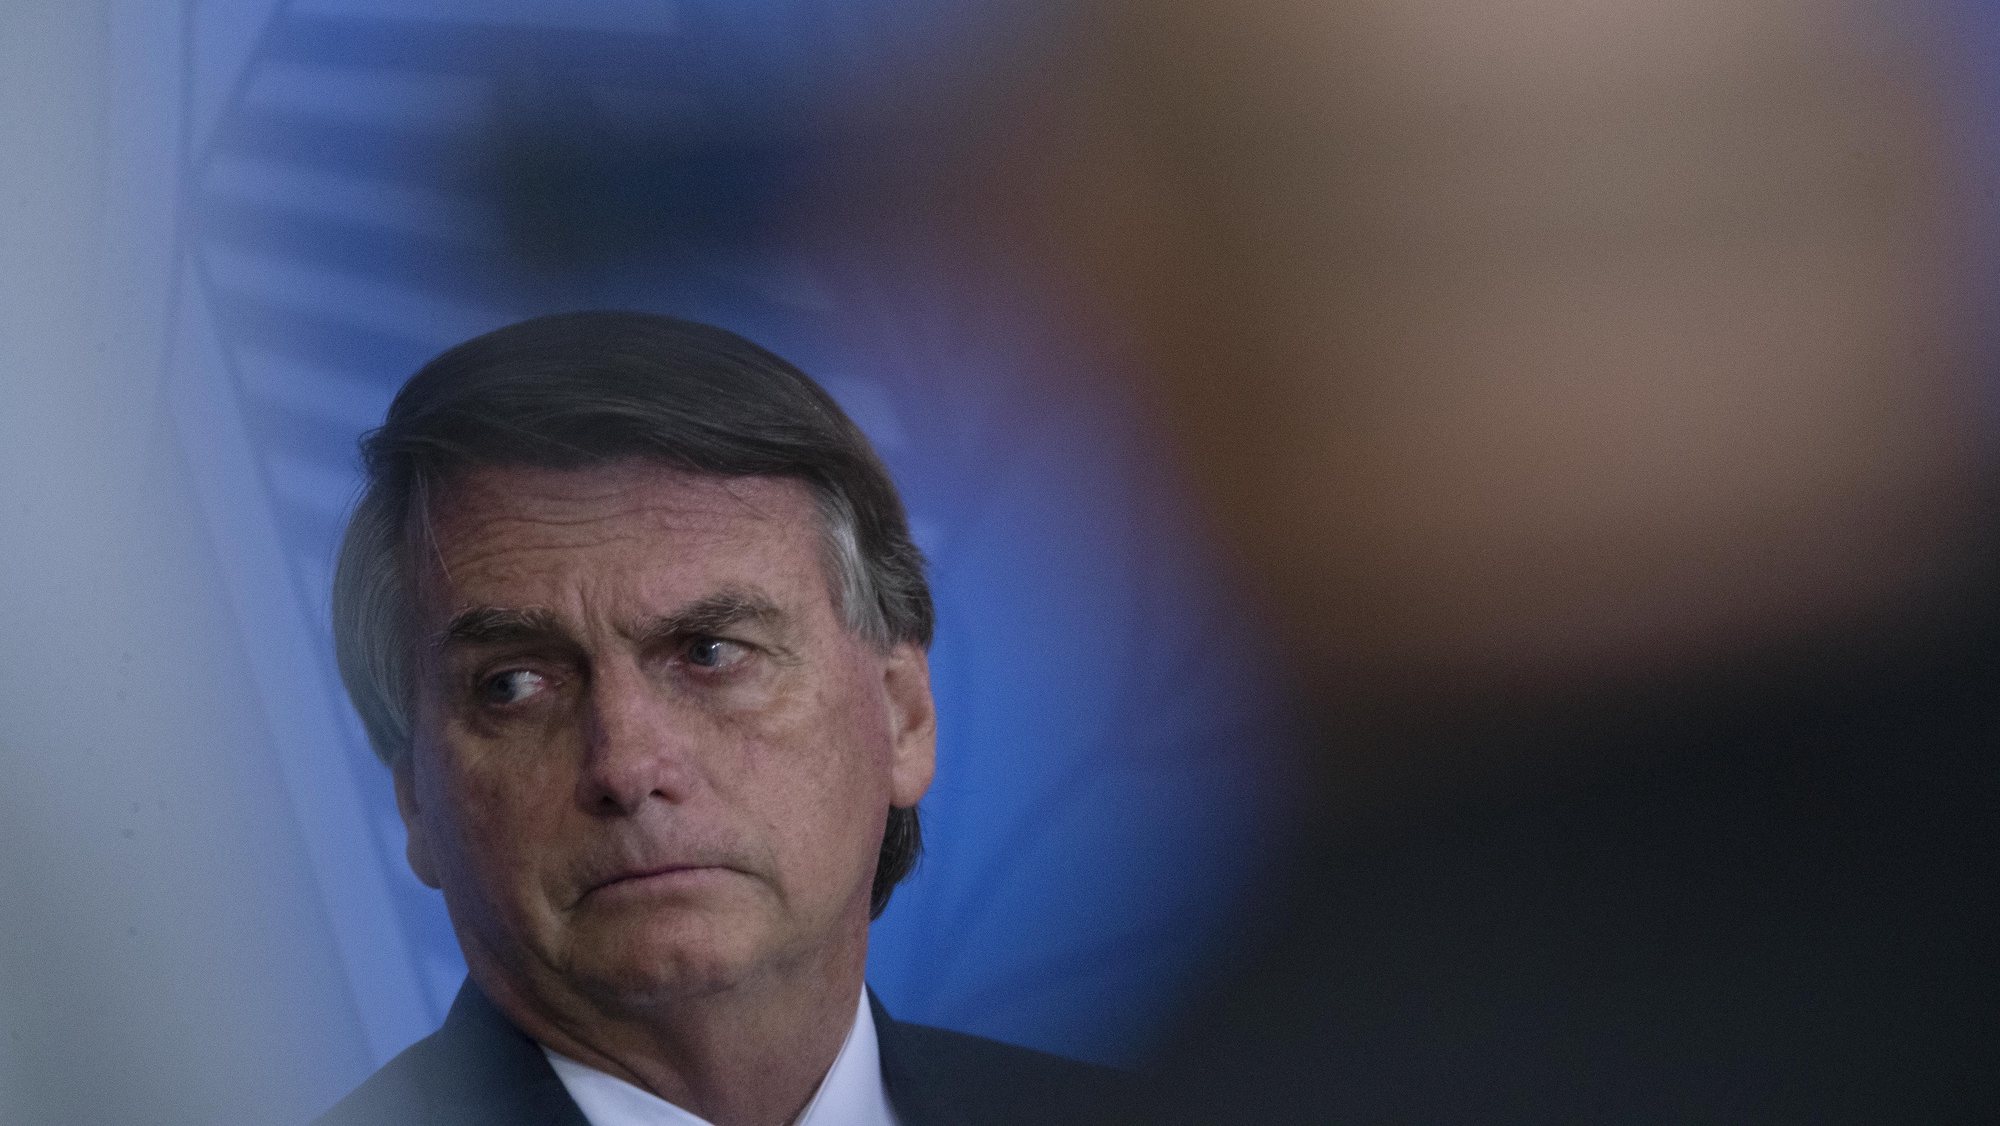 epa09927302 The President of Brazil, Jair Bolsonaro, participates in the ceremony of New Deliveries of the Income and Opportunity Program at  the Palacio do Planalto, in Brasilia, Brazil, 04 May 2022.  EPA/Joedson Alves